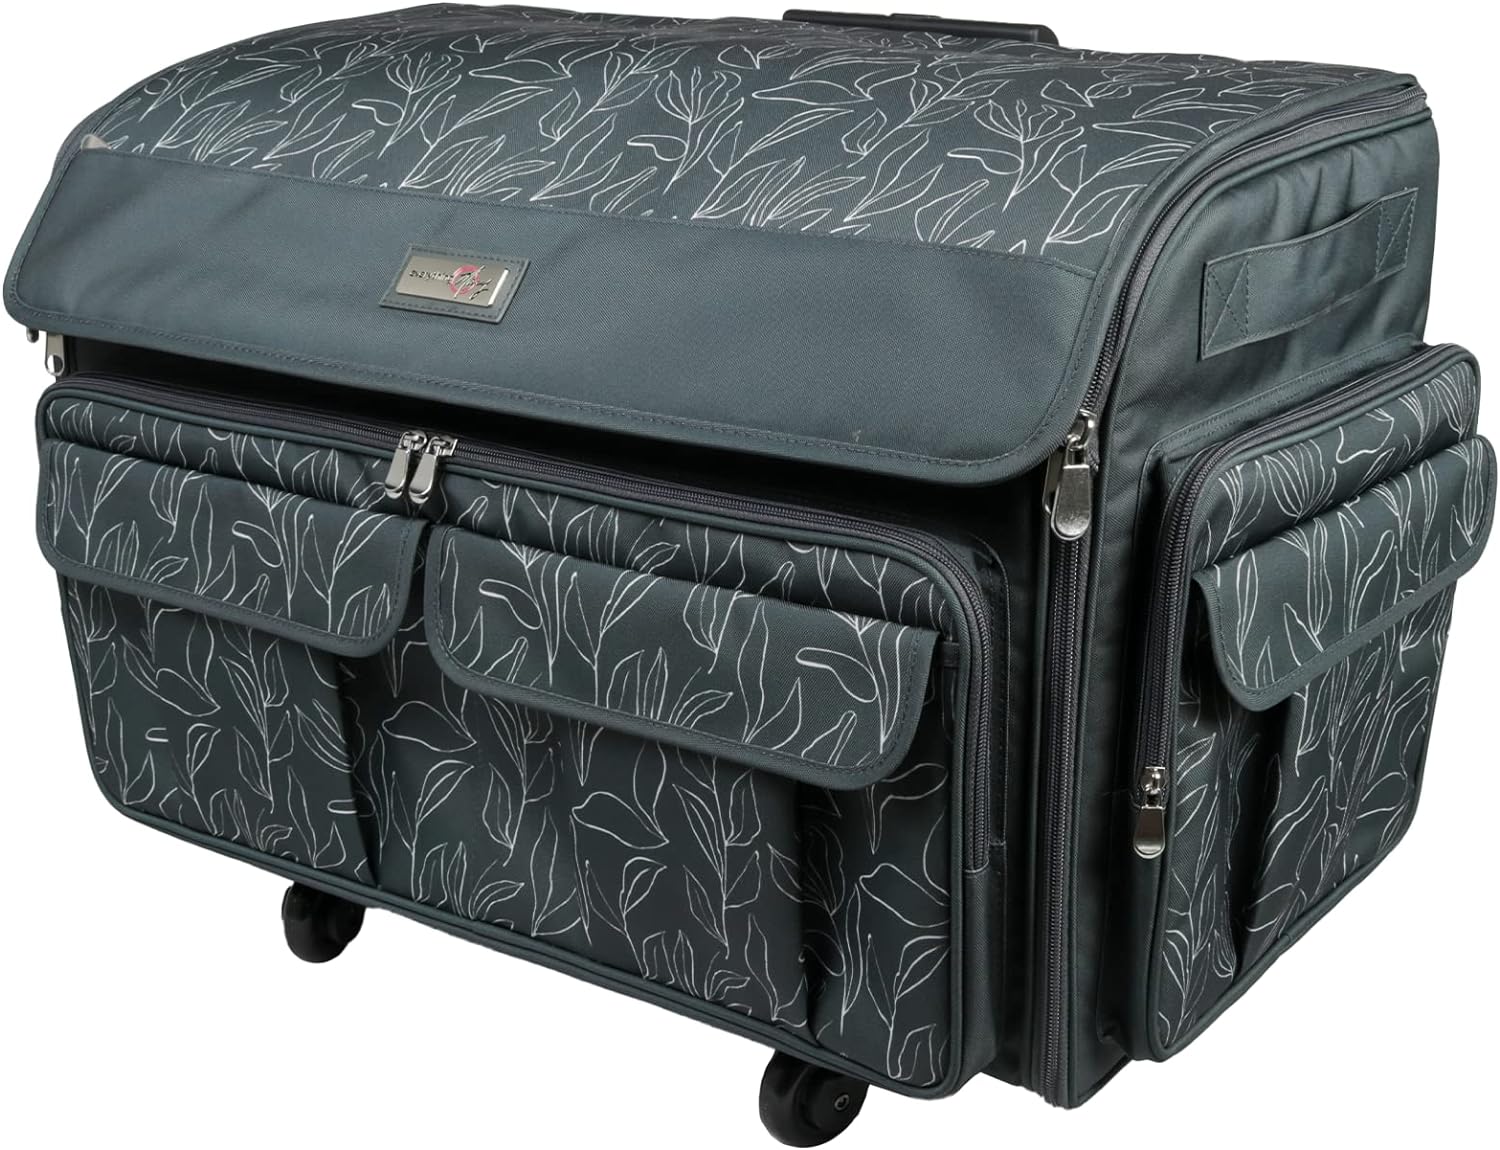 Everything Mary XXL Rolling Sewing Tote, Black & Floral - Rolling Carrying Storage Cover Case Compatible with Large Brother and Singer Machines - Universal Travel & Craft Tote Bag